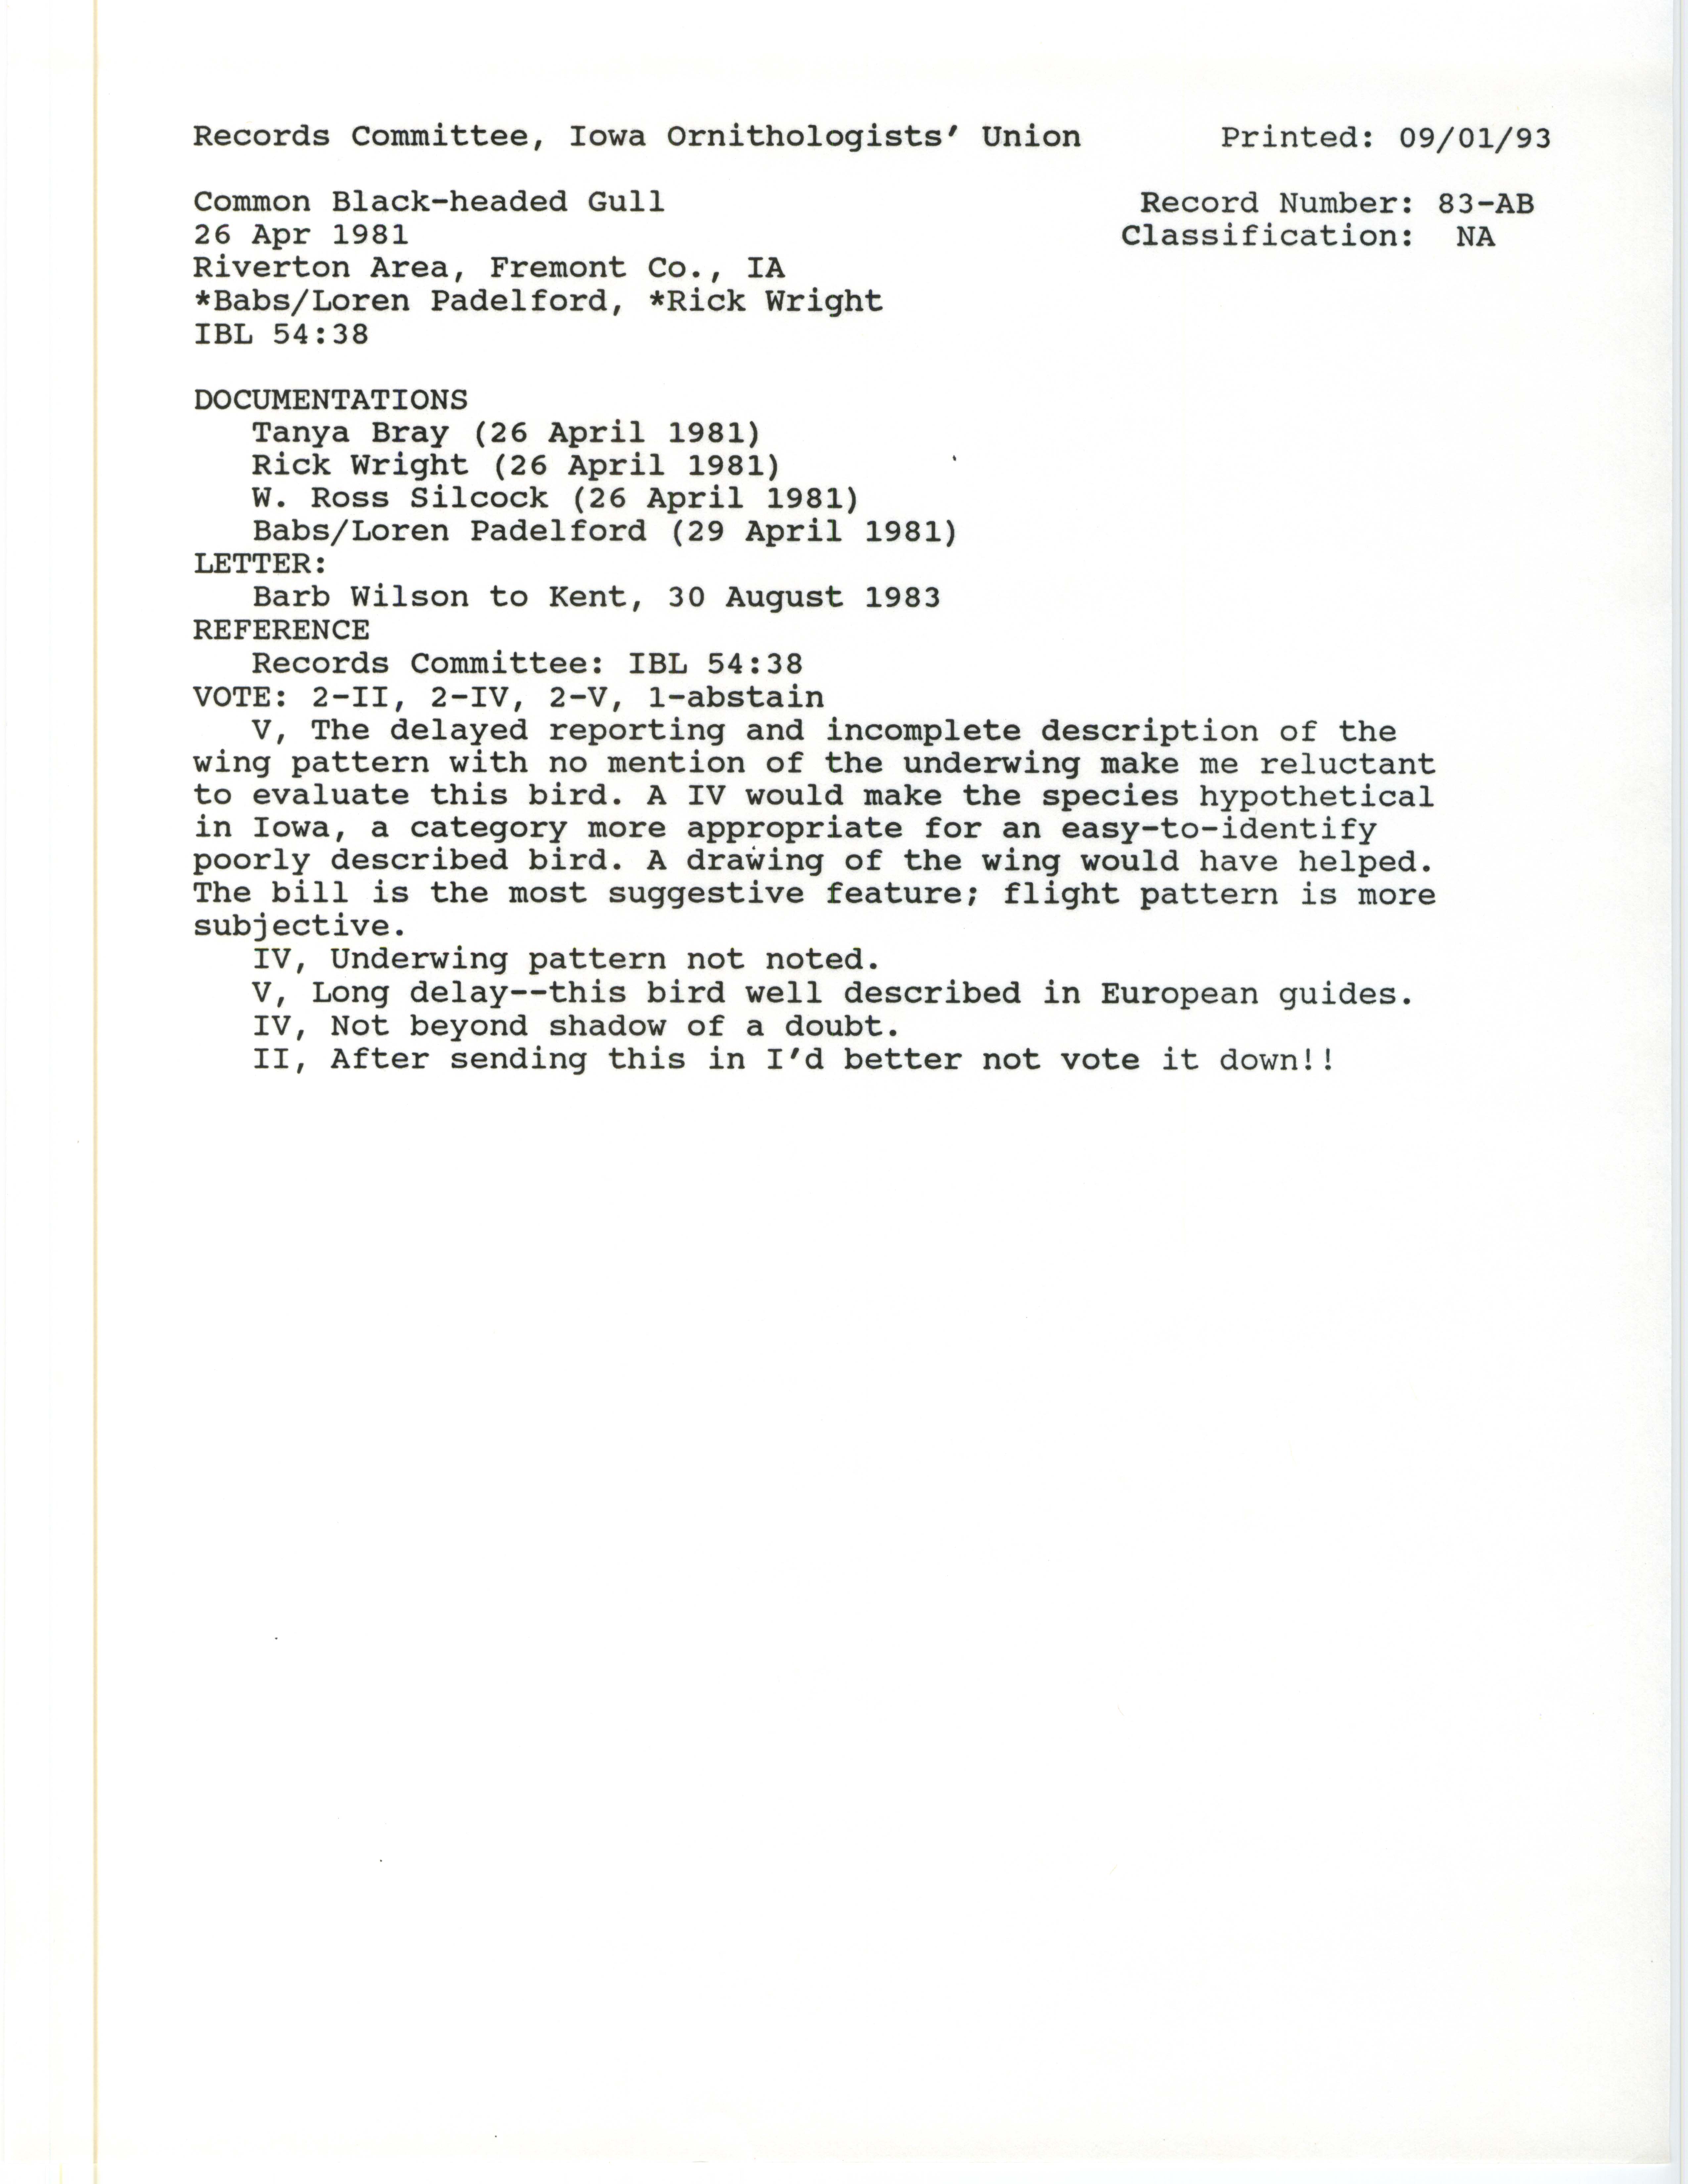 Records Committee review for rare bird sighting of Black-headed Gull at Riverton State Wildlife Management Area, 1981